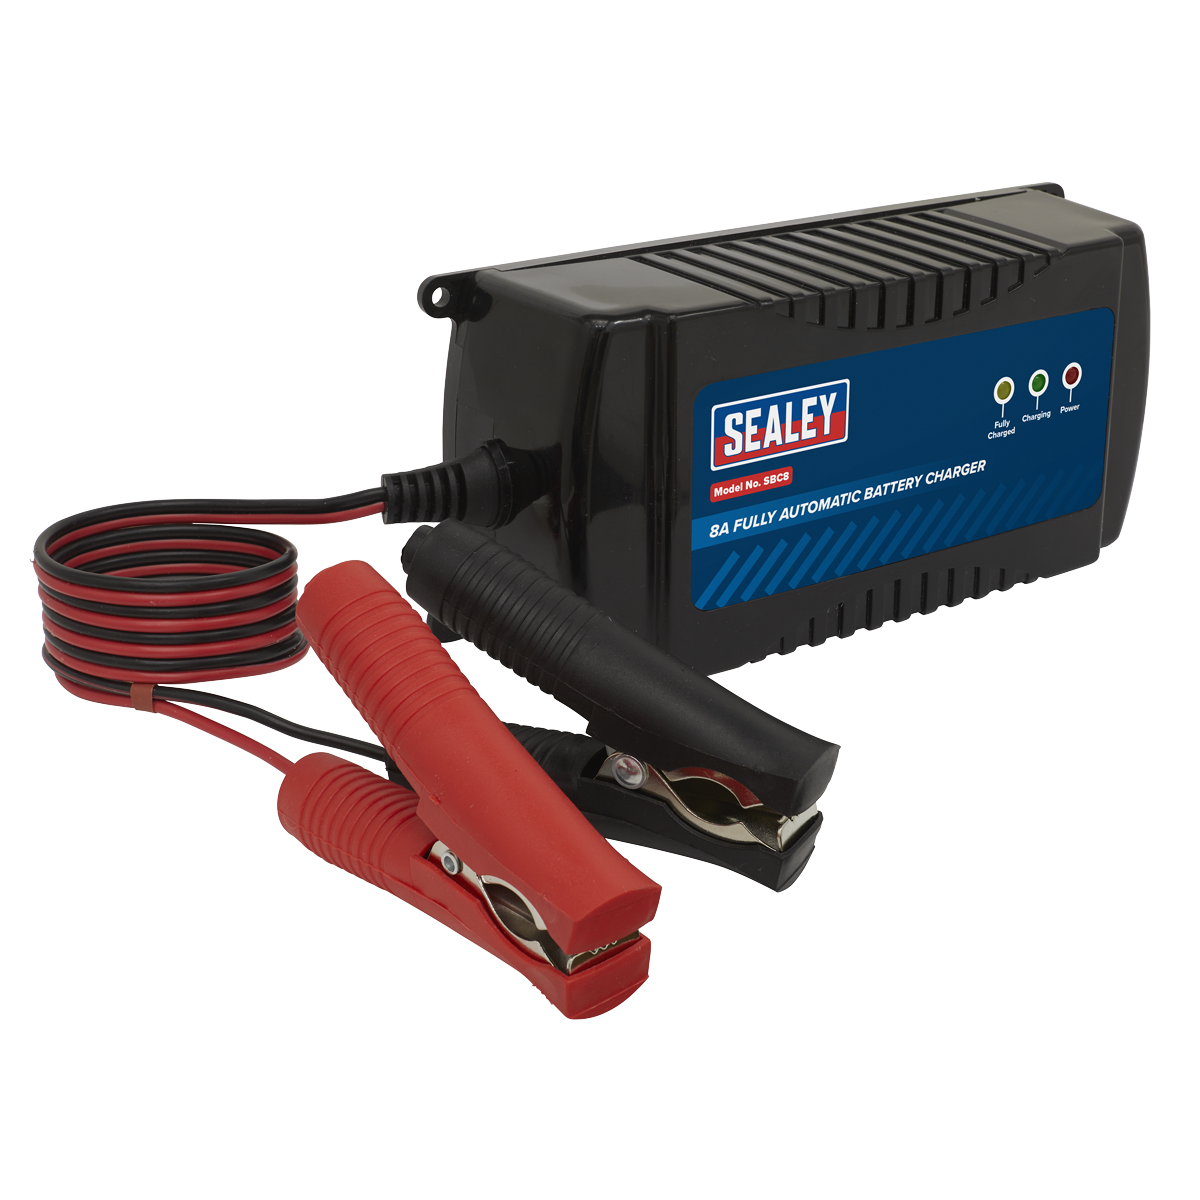 SEALEY - SBC8 Battery Charger 12V 8A Fully Automatic